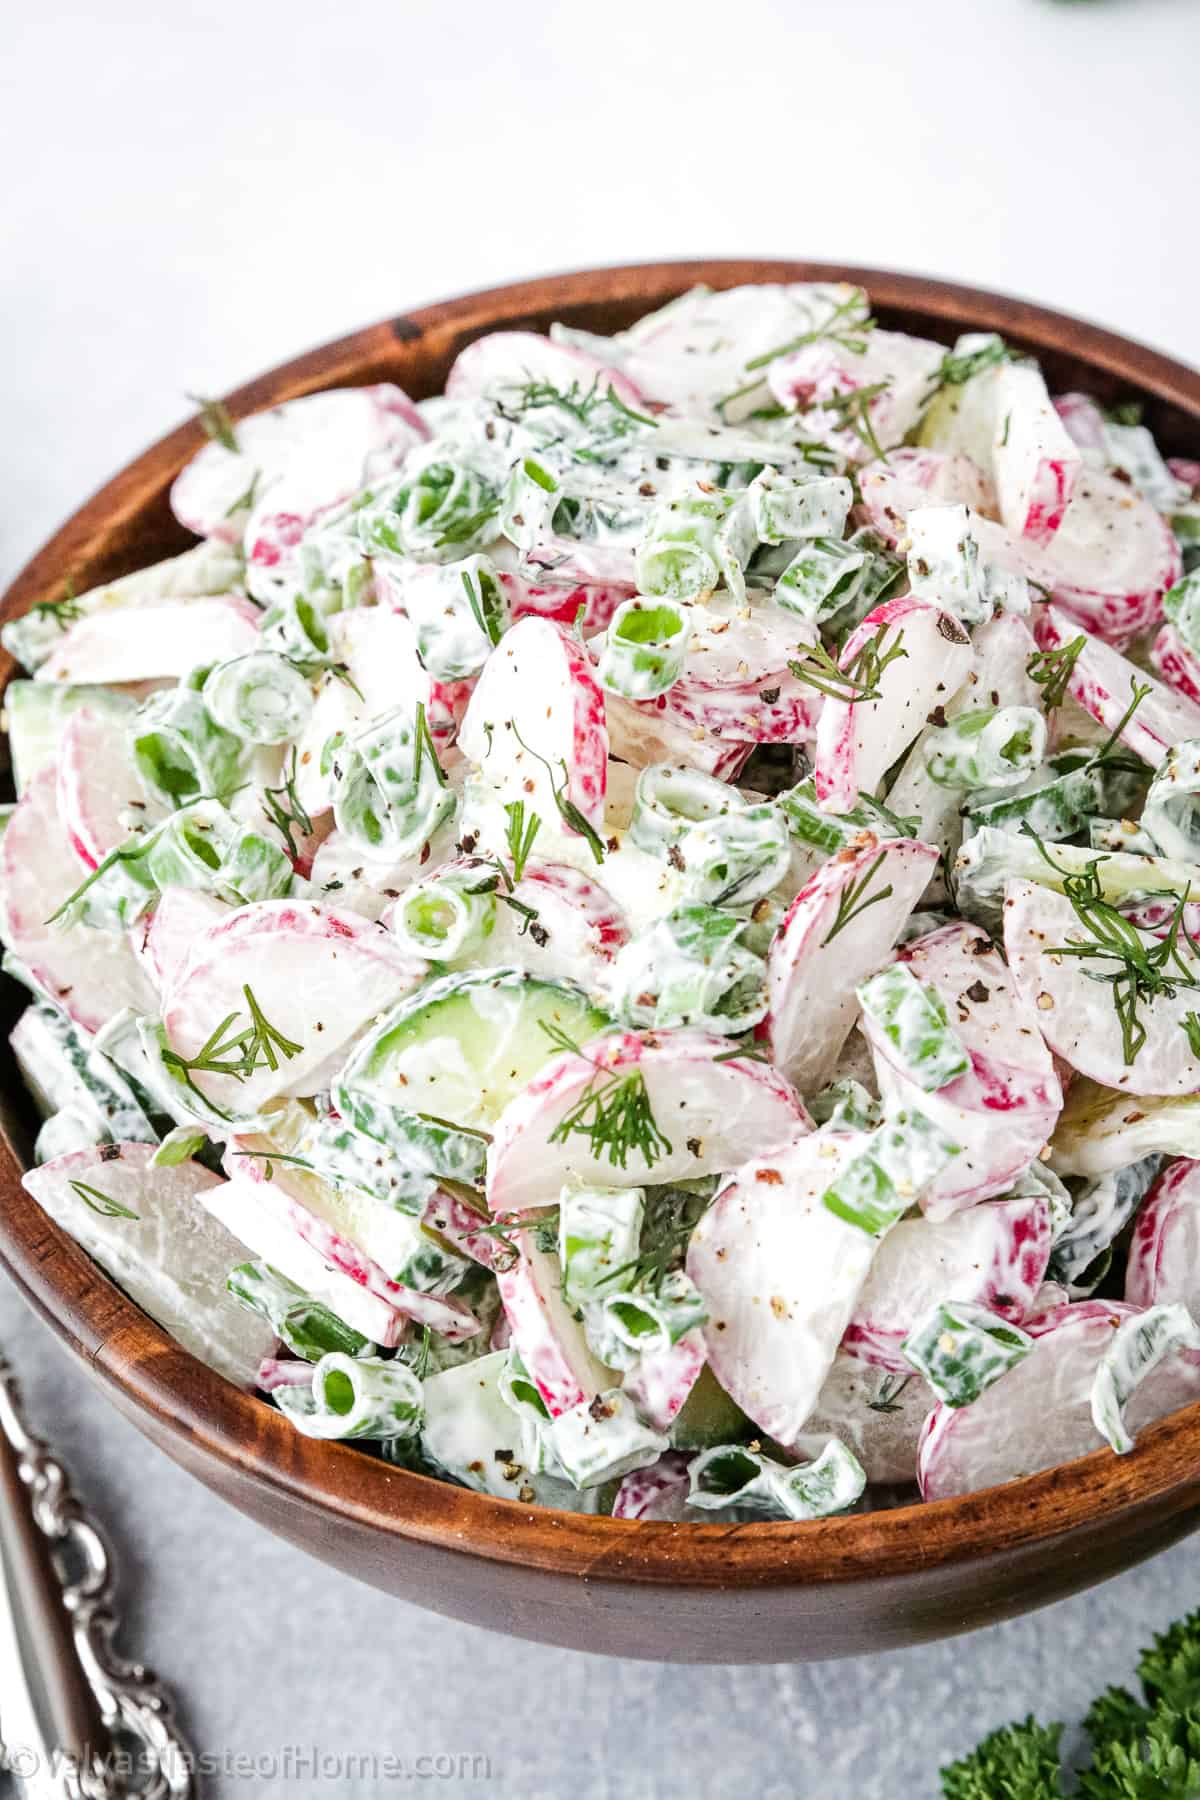 This Radish Salad recipe is not only delicious, but it's also incredibly easy to make.